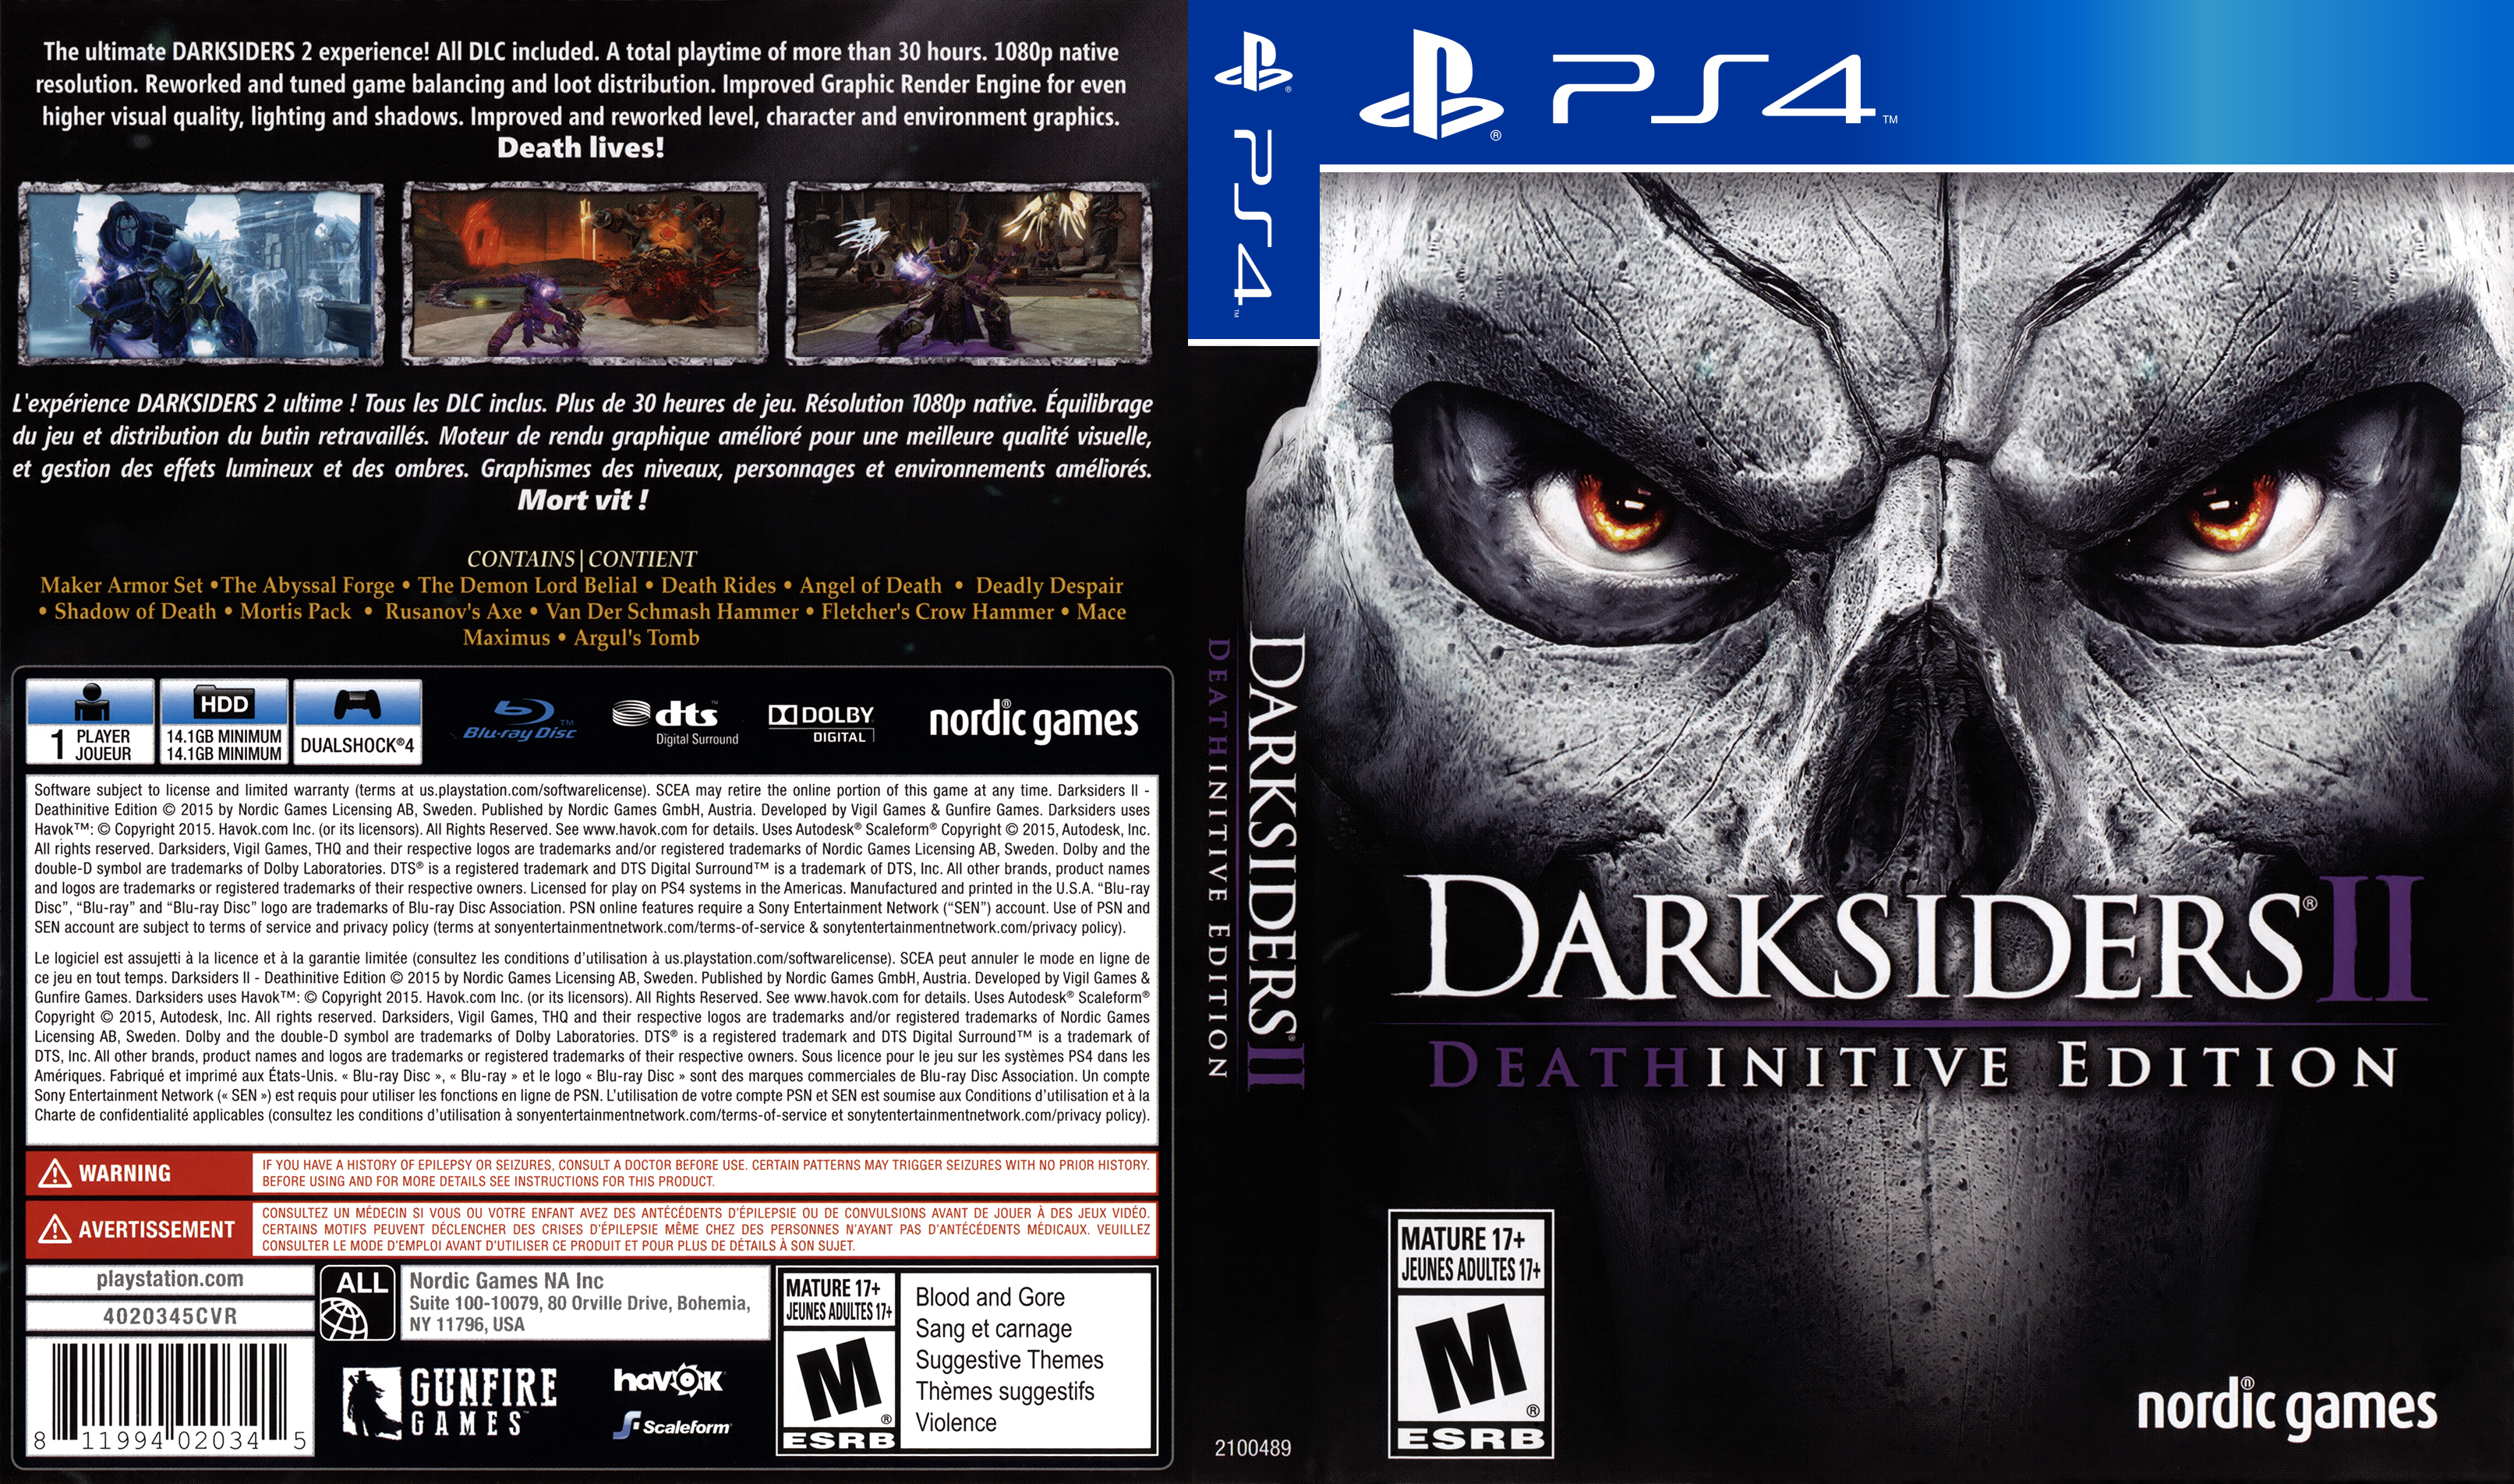 Darksiders Ii Playstation 4 Covers Cover Century Over 500 000 Album Art Covers For Free